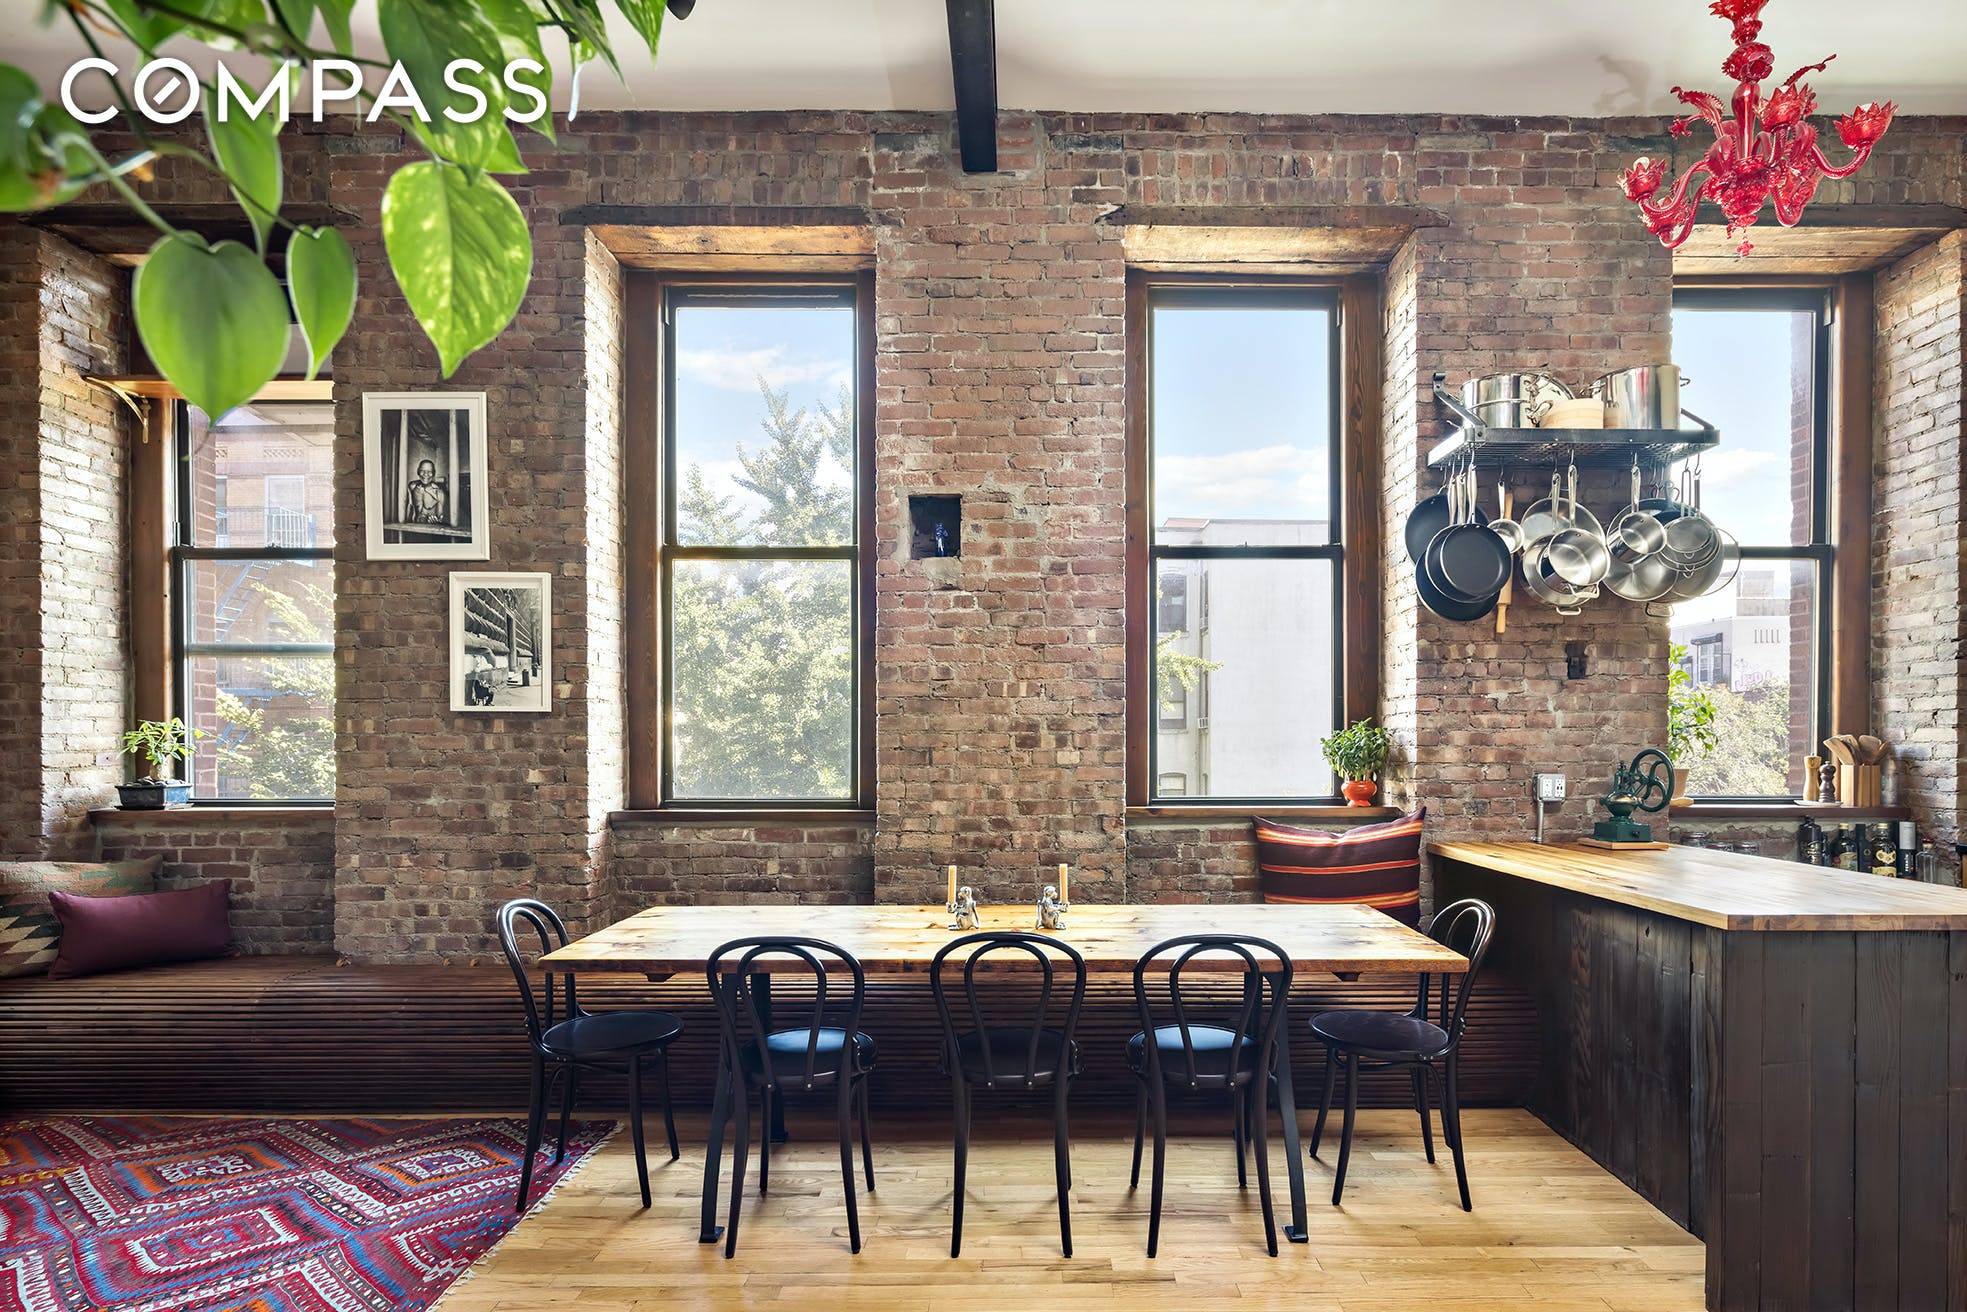 This former East Village Schoolhouse converted to co op, houses 20 units spanning 5 floors.